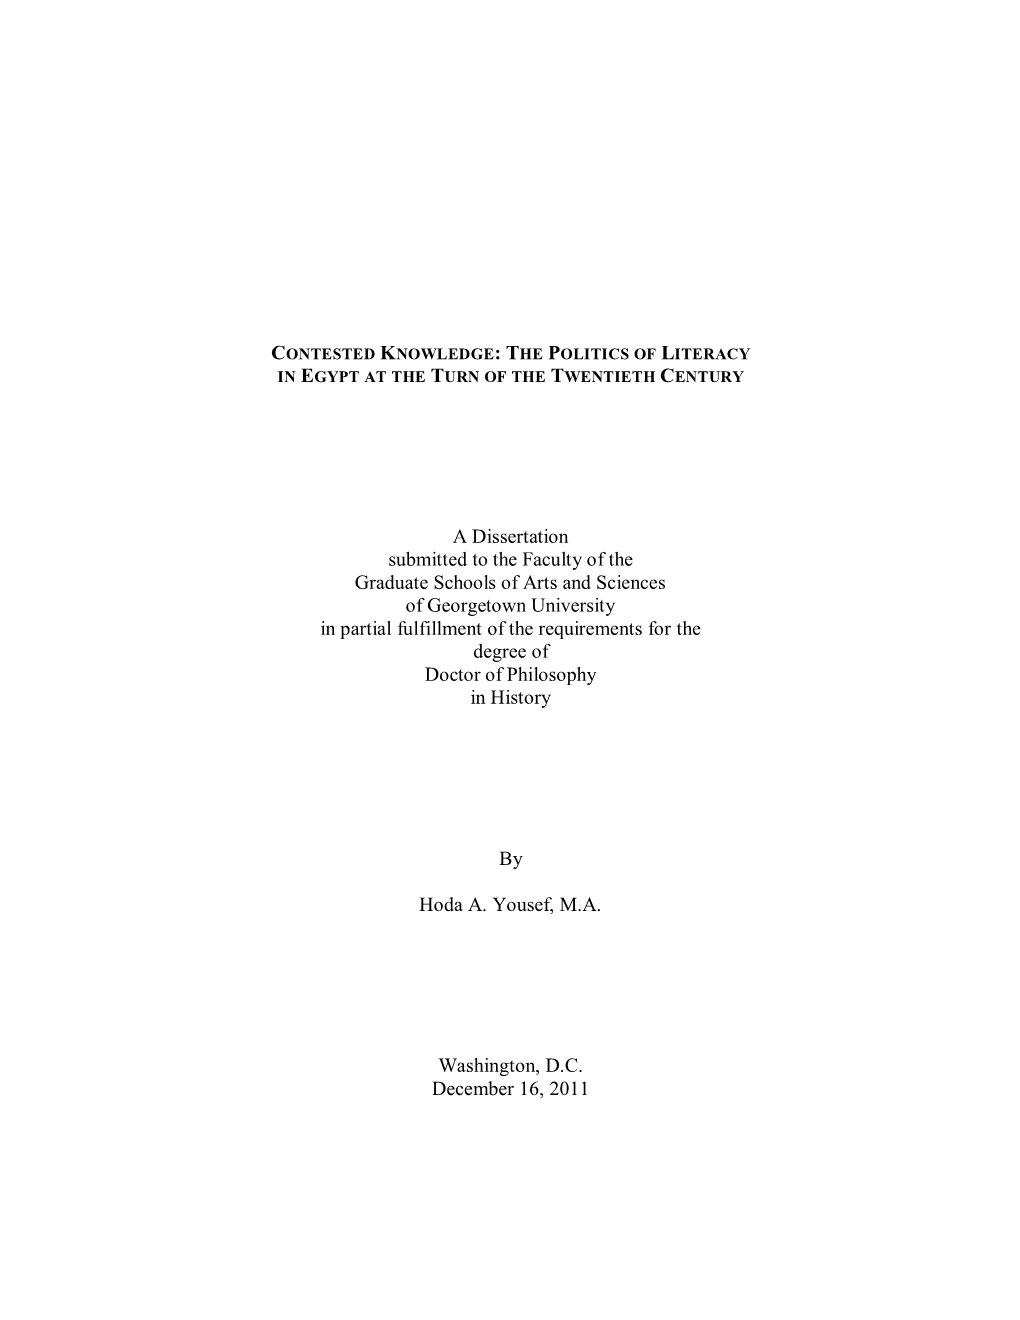 A Dissertation Submitted to the Faculty of the Graduate Schools of Arts And